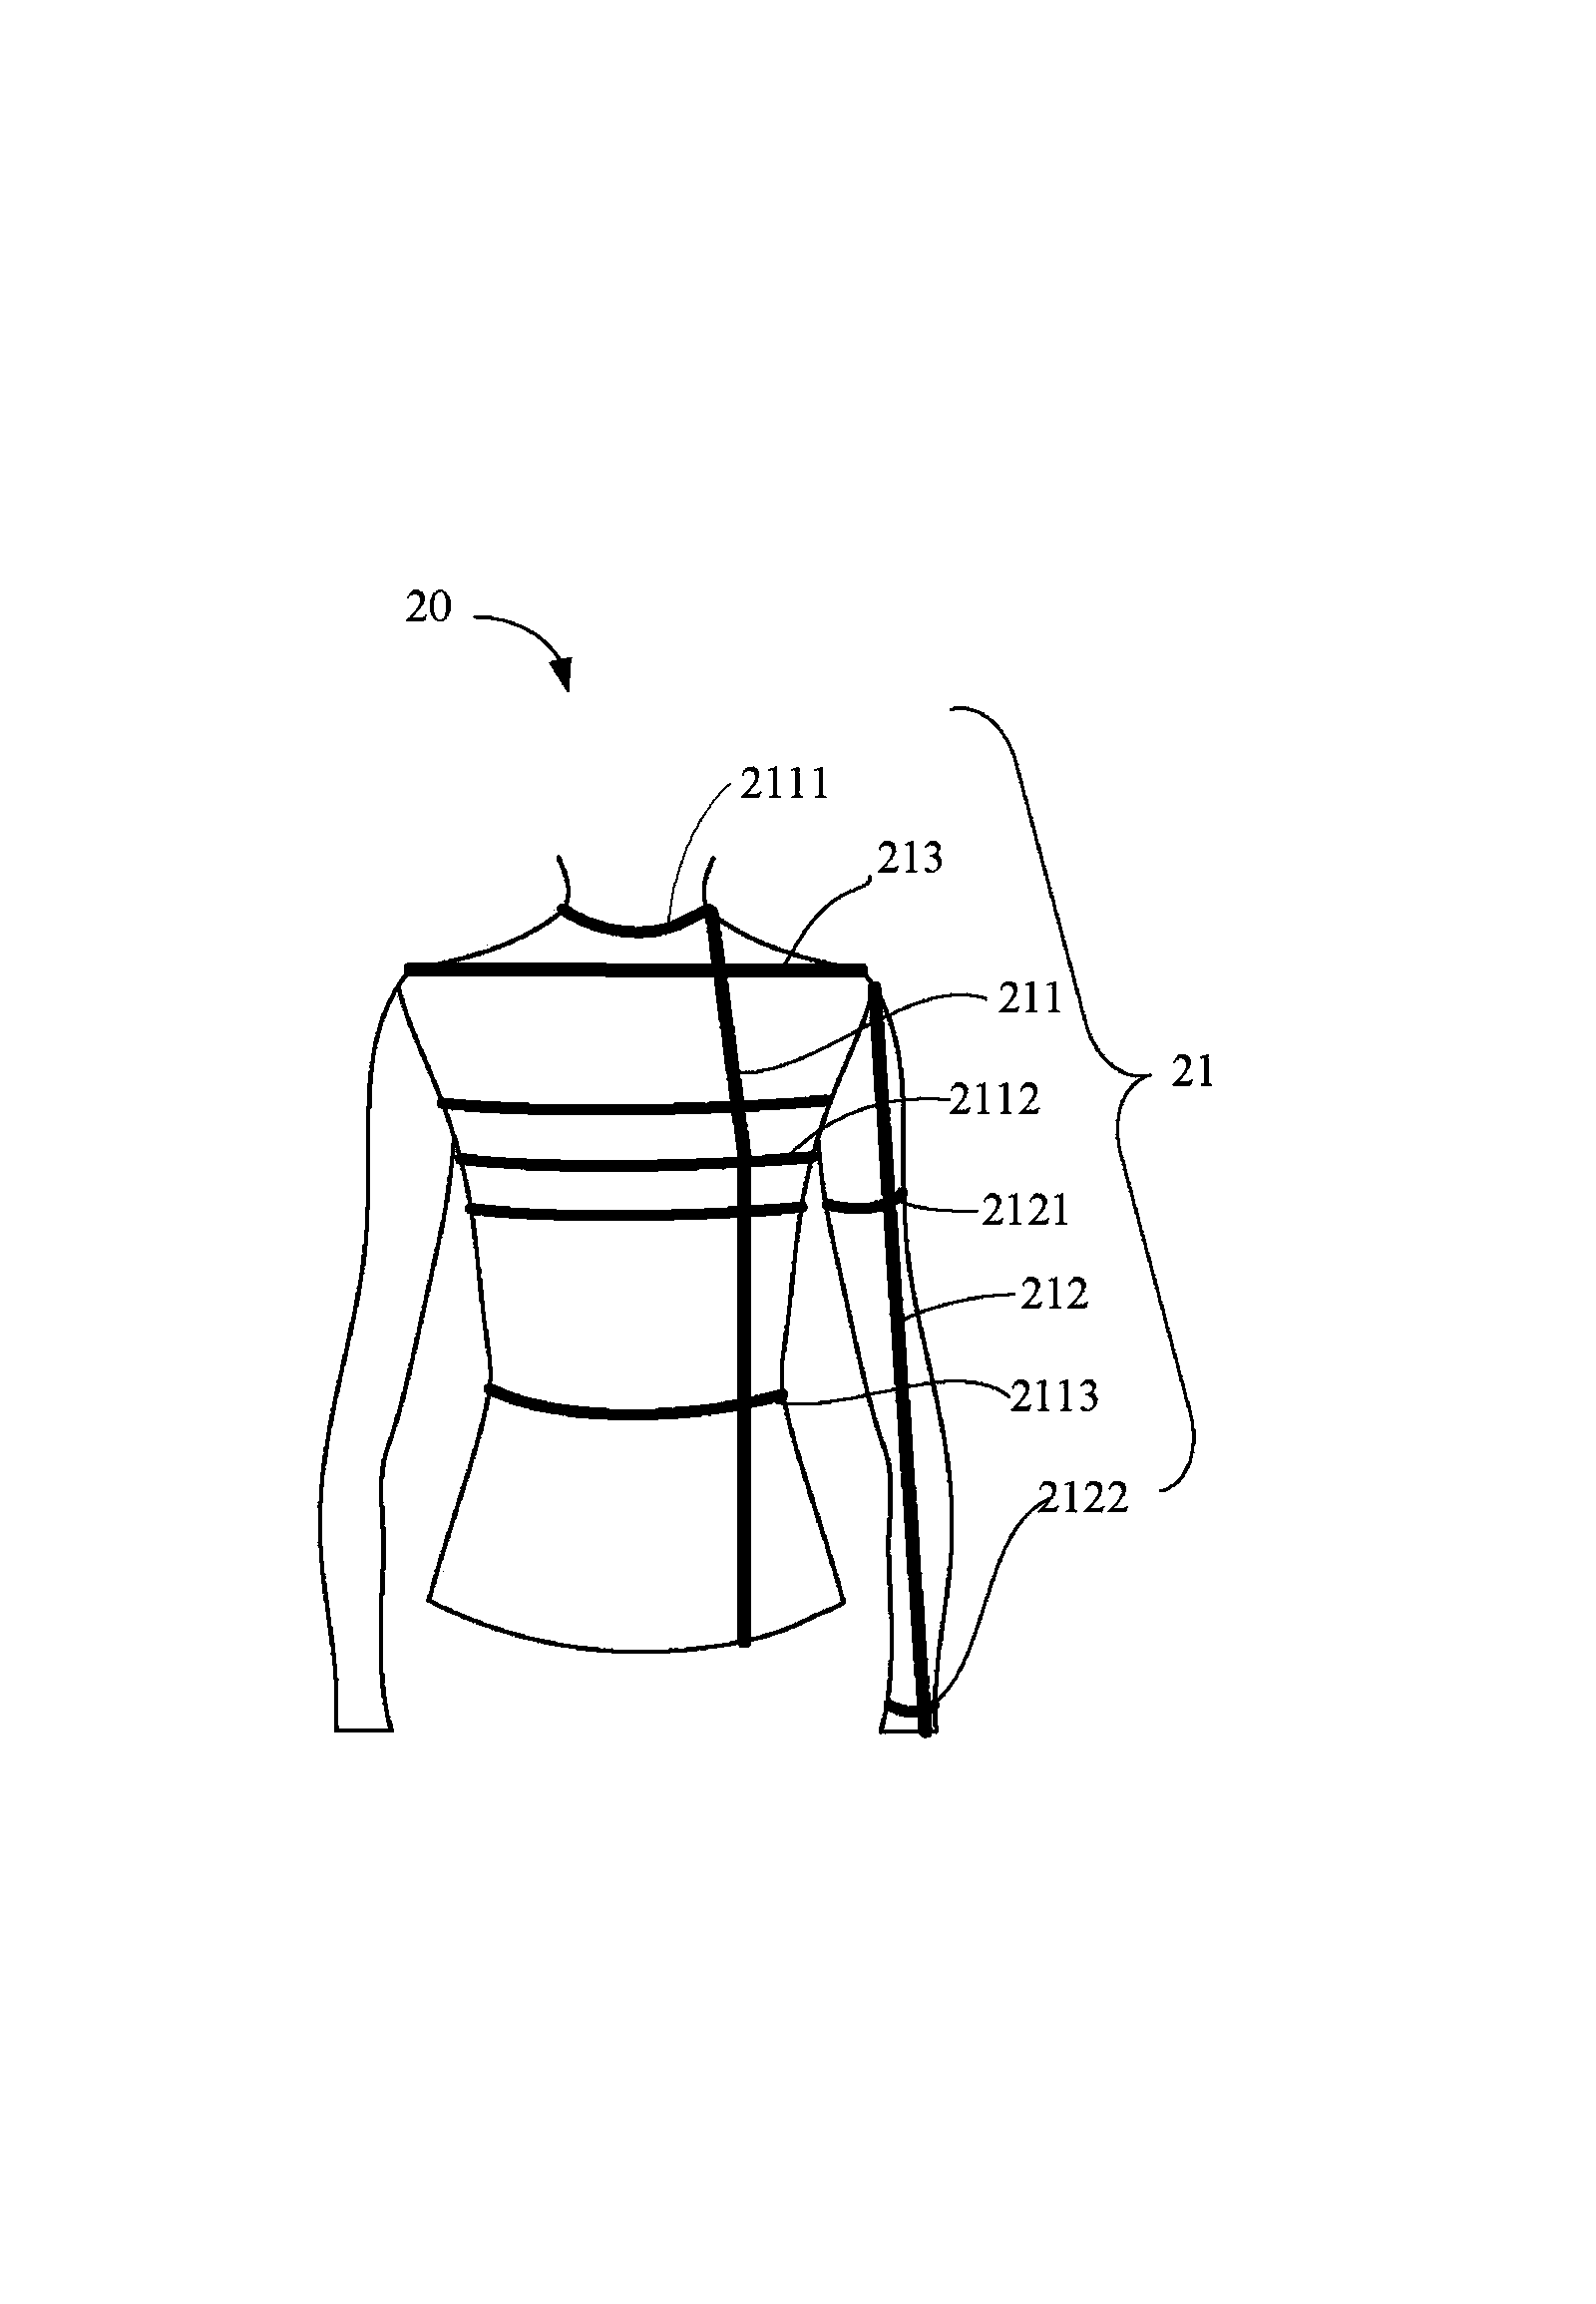 Dimension measurement device and method of acquiring body dimension data and displaying fittings